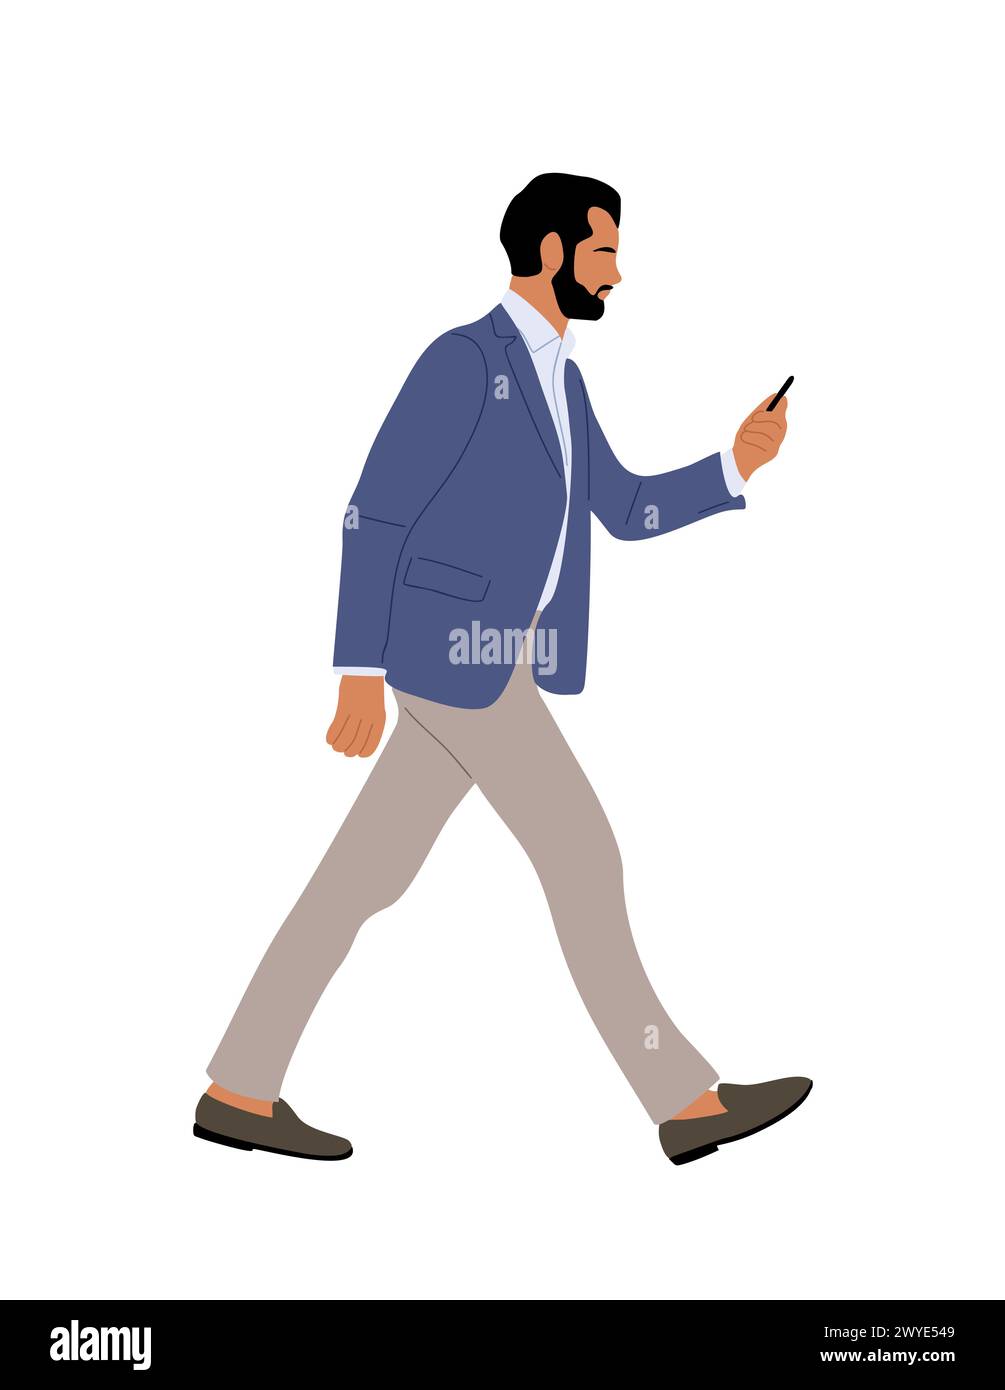 Business man walking side view, holding phone.  Stock Vector